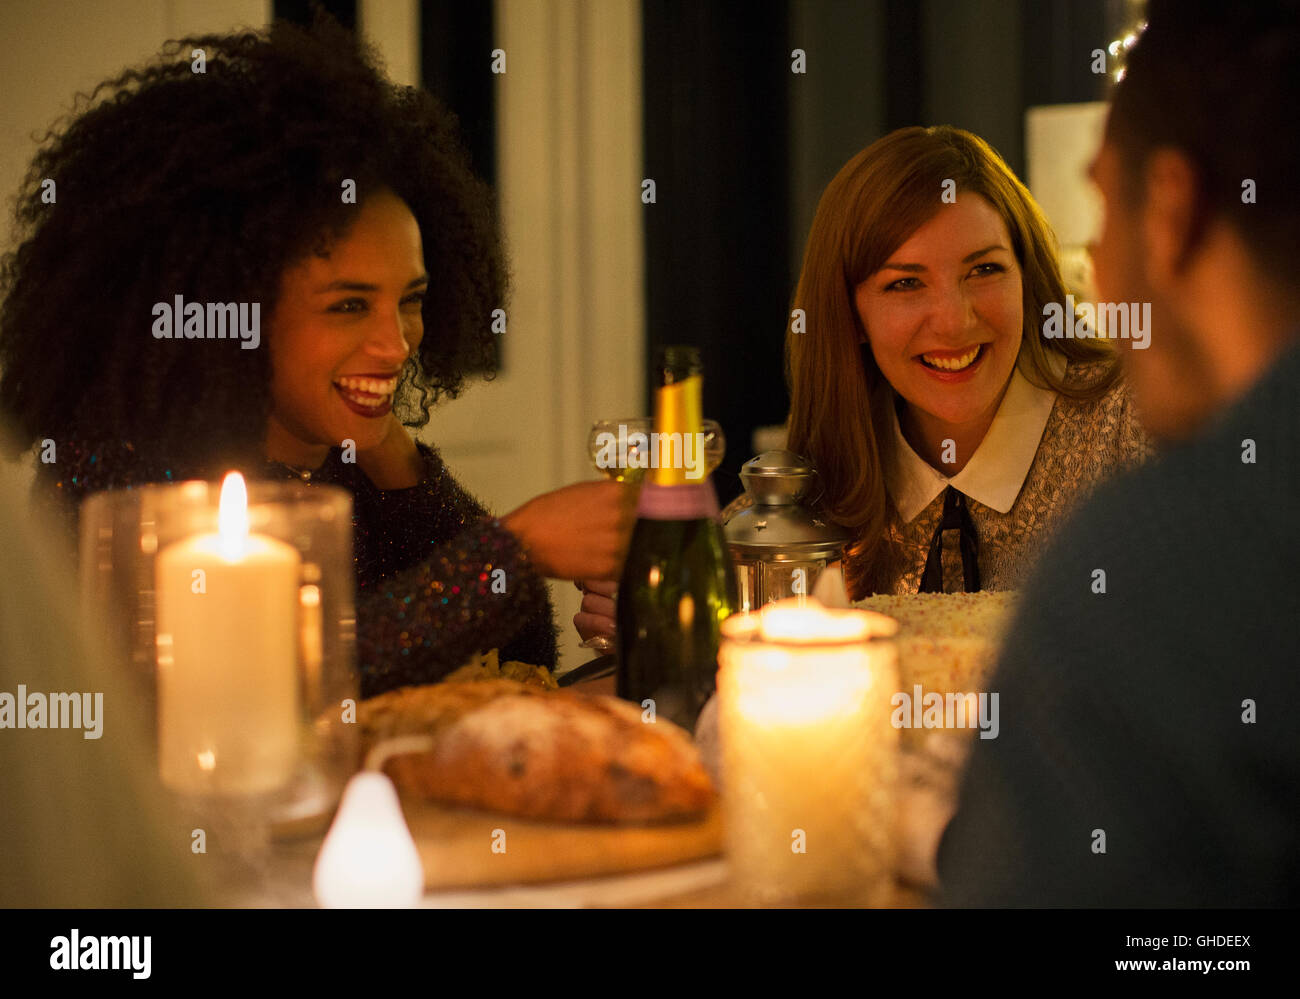 Smiling friends drinking champagne at candlelight dinner table Stock Photo